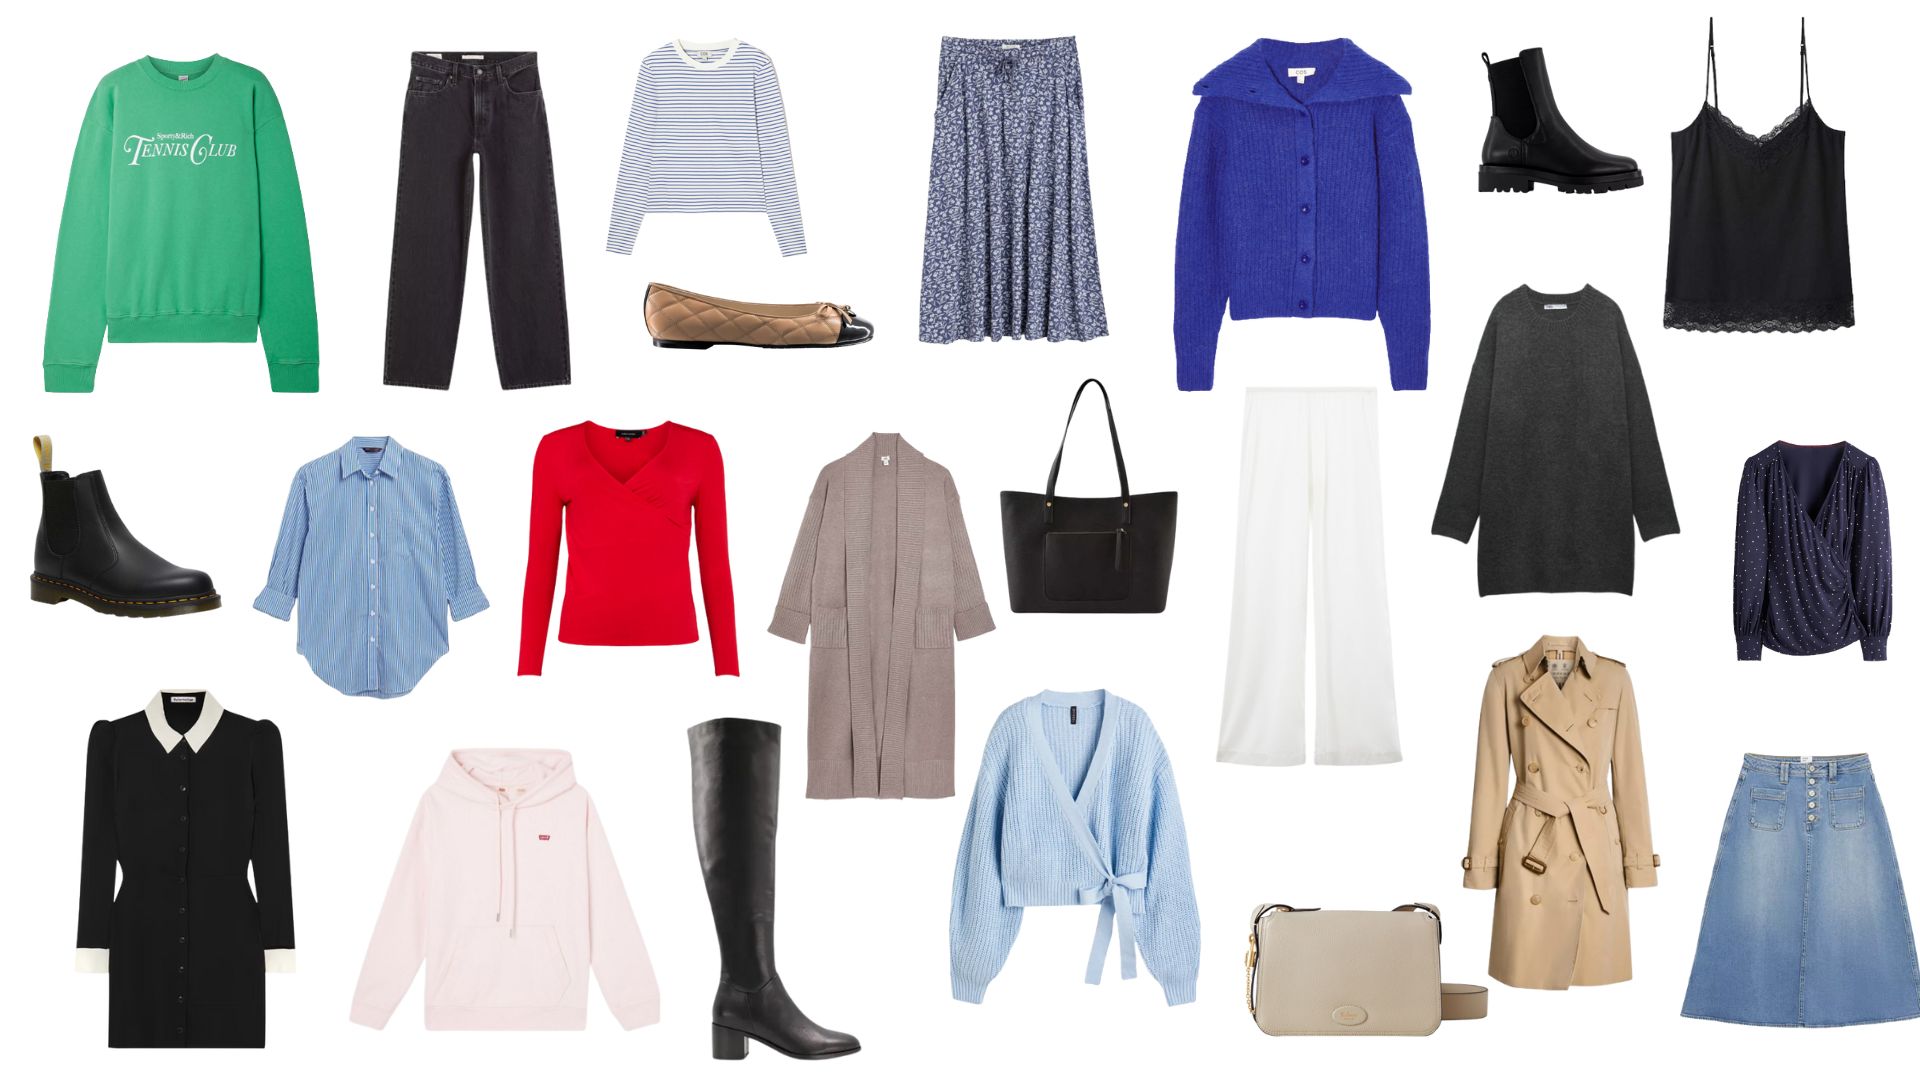 How to build a capsule wardrobe for 2022 according to style experts |